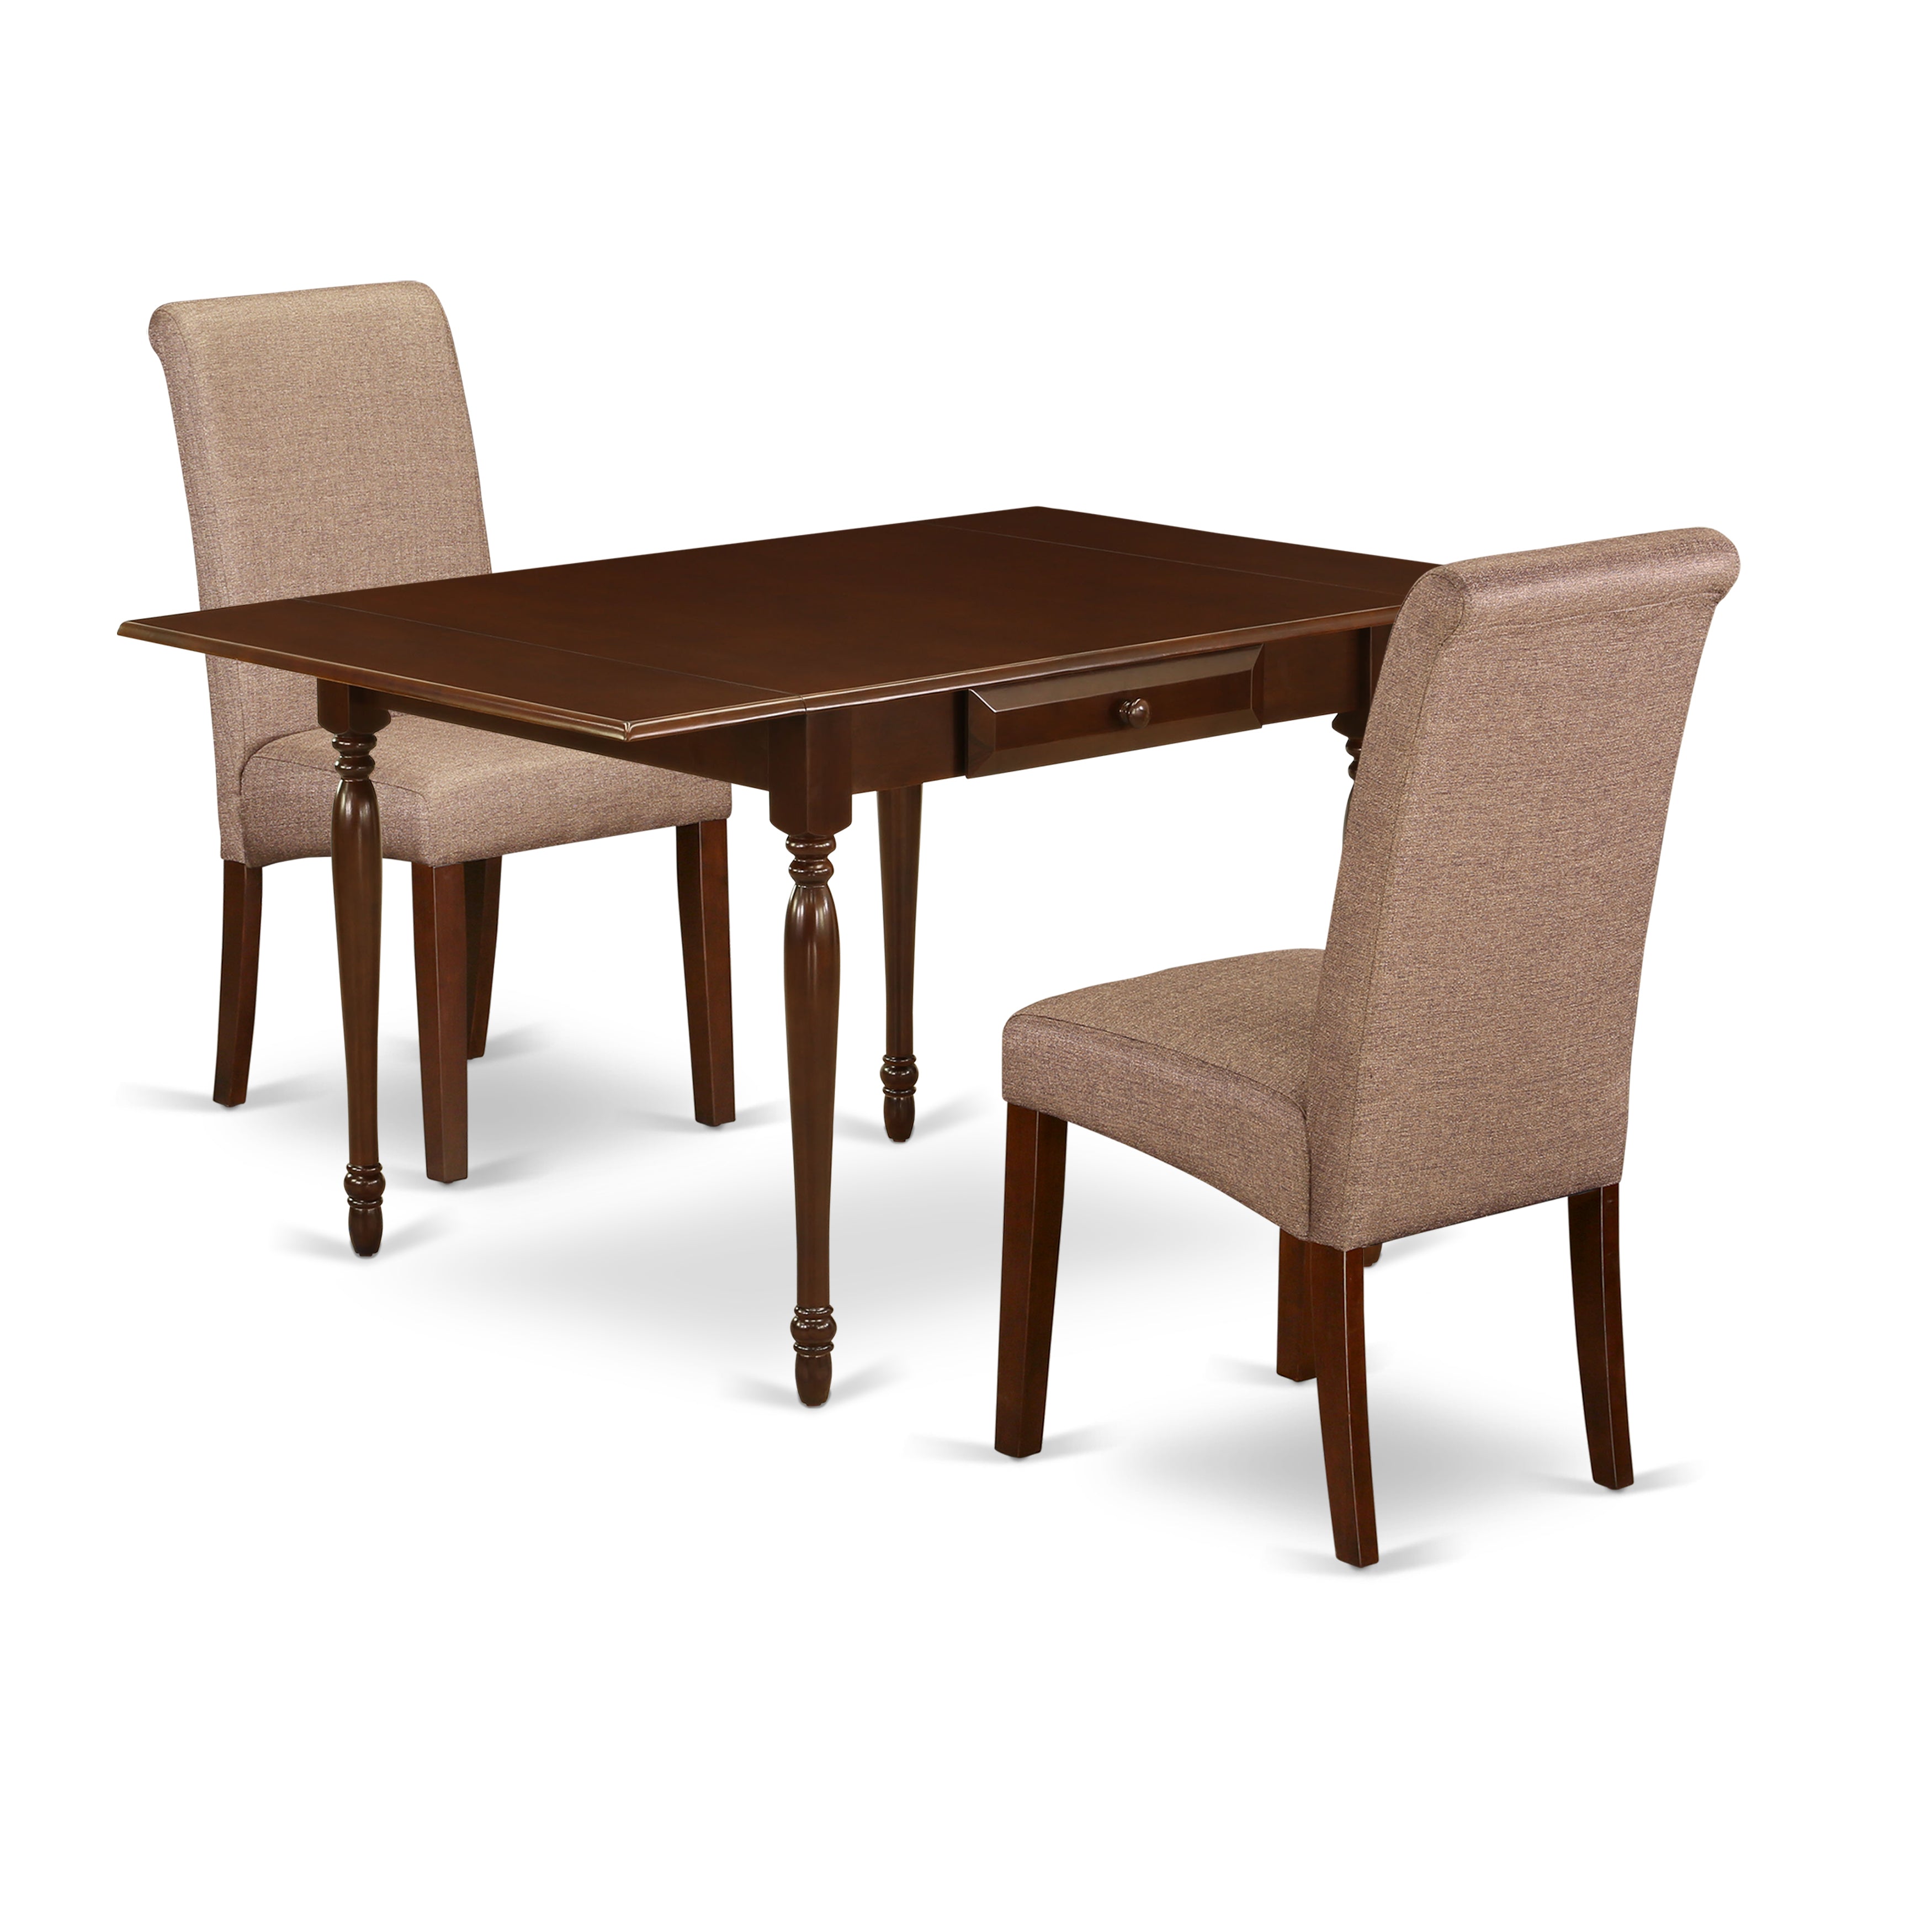 East West Furniture MZBA3-MAH-18 3Pc Dining Room Table Set Consists of a Small Kitchen Table and 2 Upholstered Dining Chairs with Brown Linen fabric Color Linen Fabric, Drop Leaf Table with Full Back Chairs, Mahogany Finish